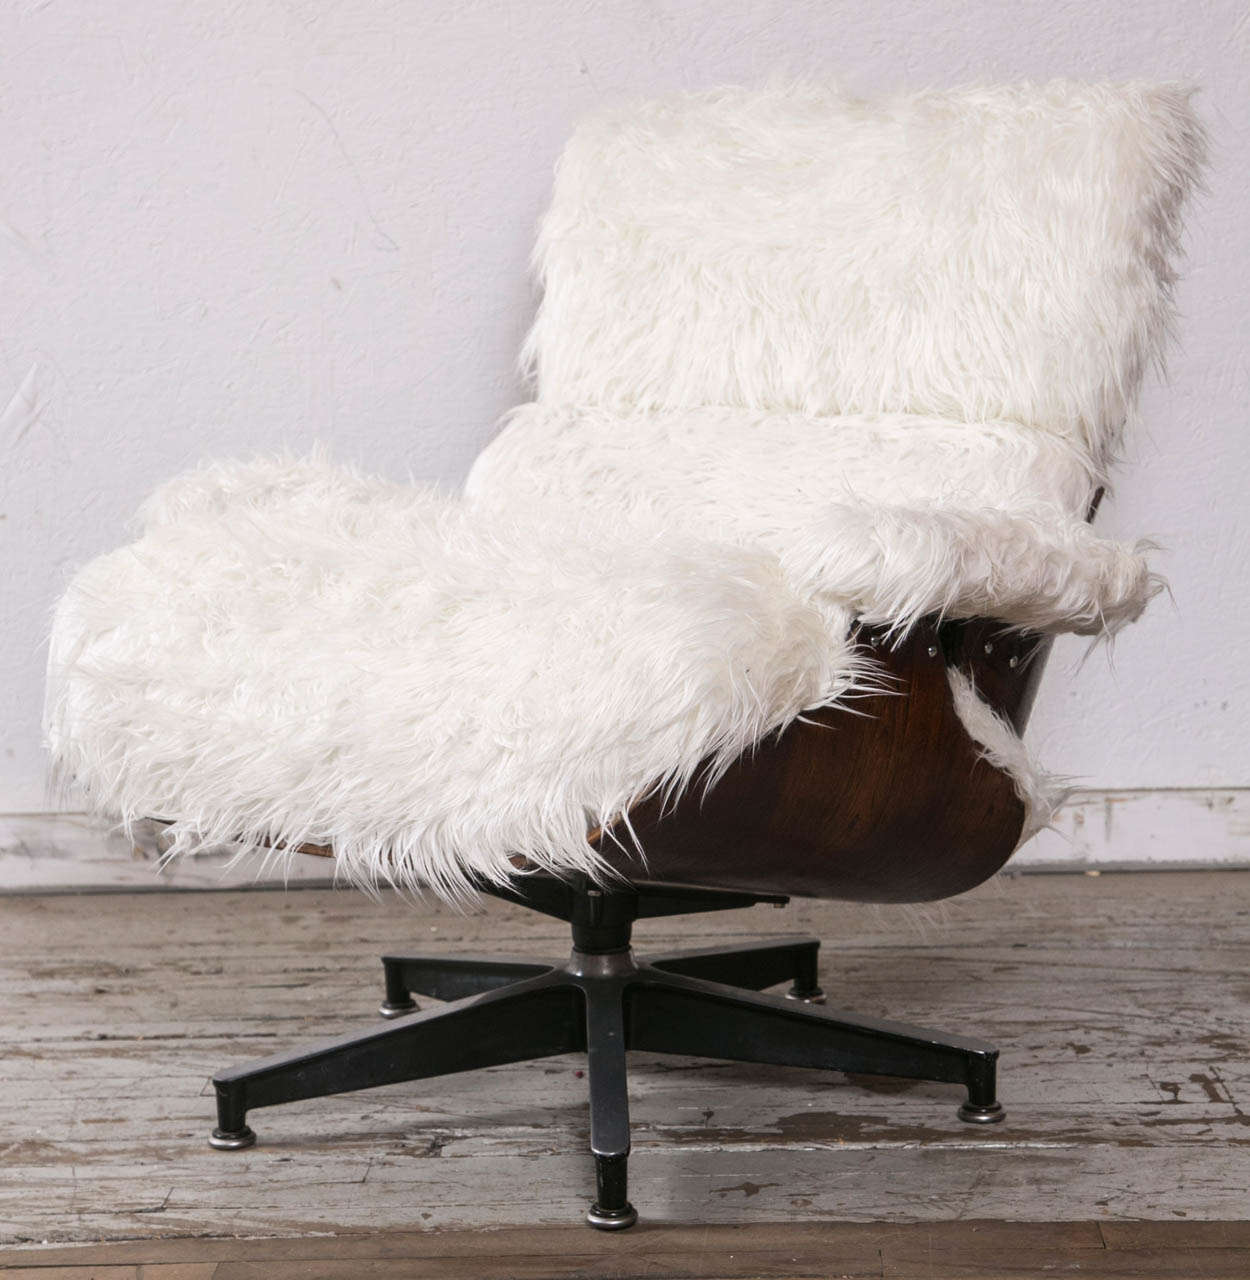 The iconic  Charles and Ray Eames 670 Rosewood lounge chair was
manufactured by Herman Miller Manufacturing Company in Zeeland, 
Michigan during the 1960's. It has been refinished and reupholstered in faux Mongolian Fur. The white color is a great